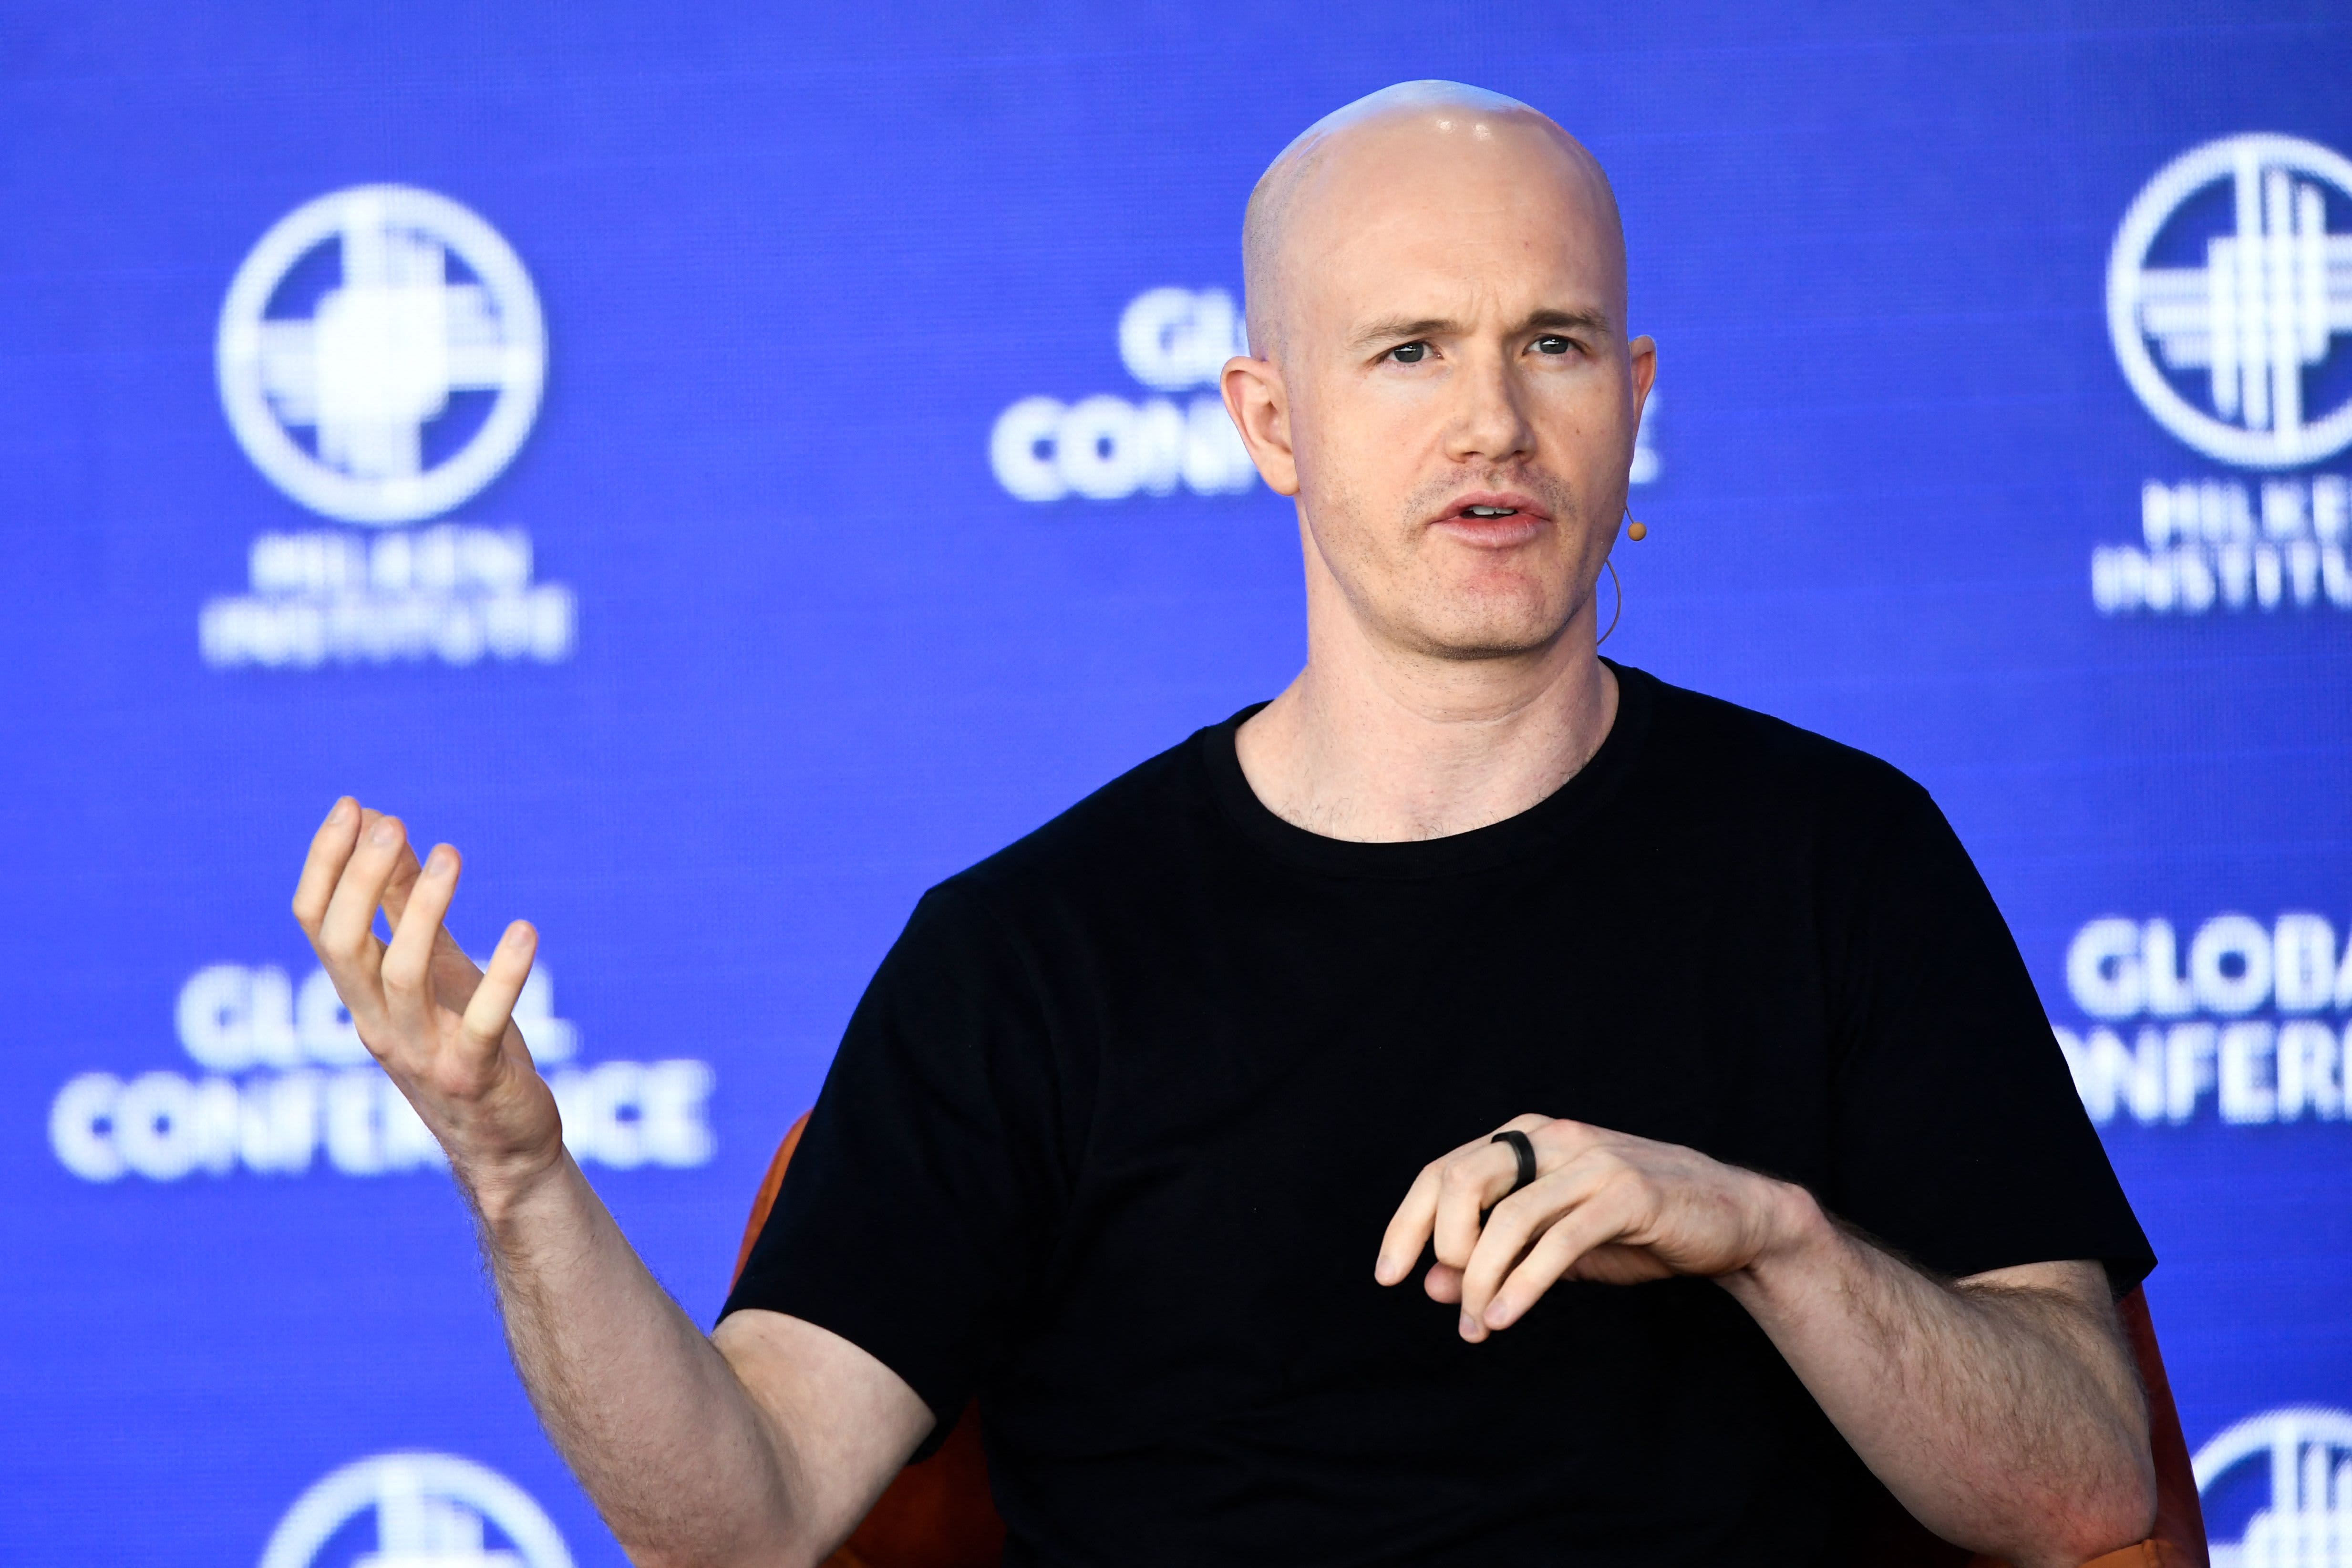 Coinbase CEO Brian Armstrong sounds the alarm about a potential 